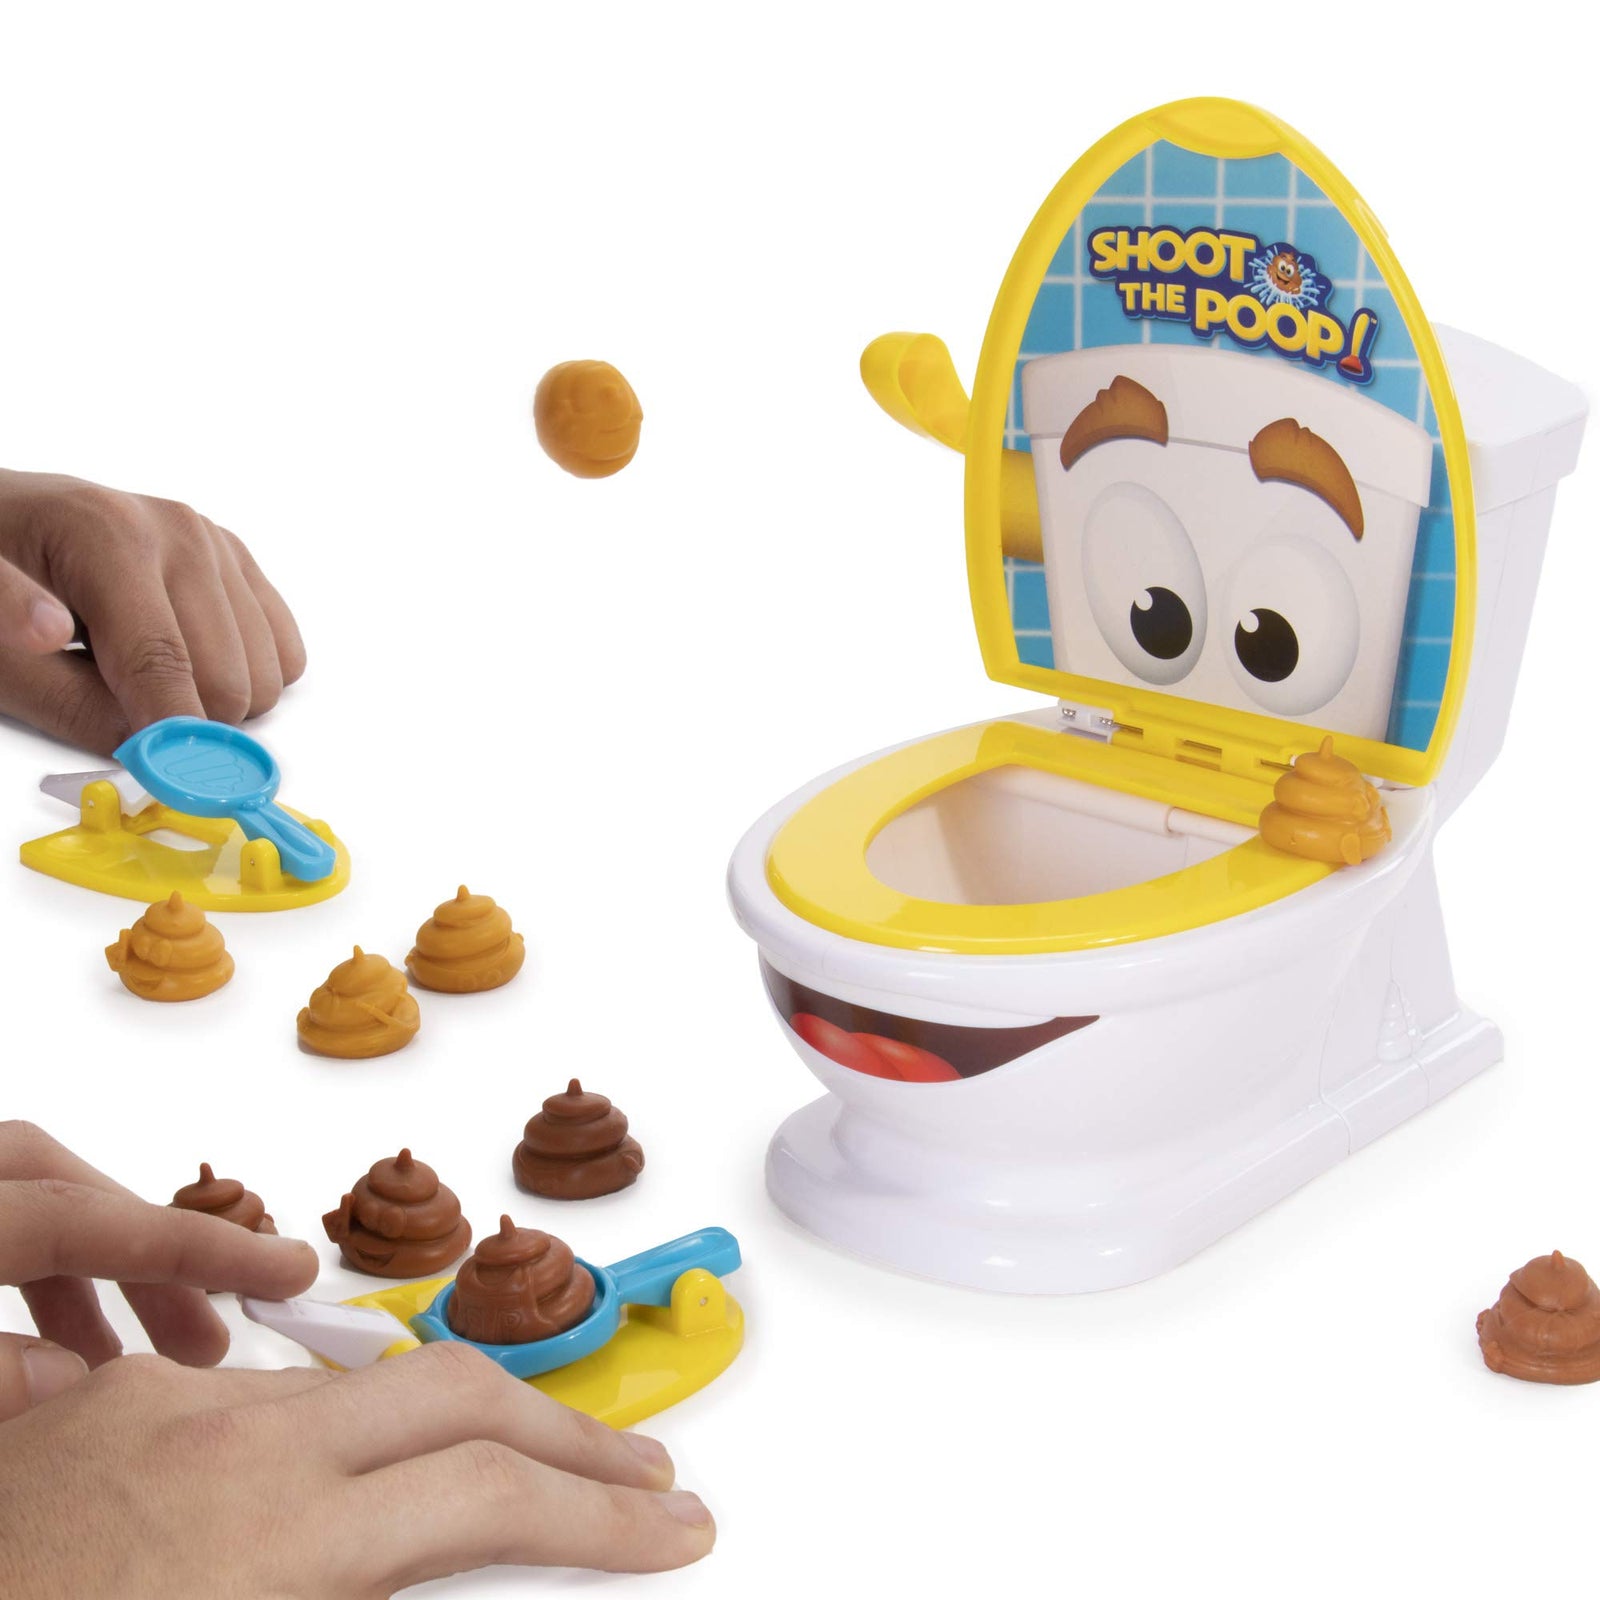 Shoot The Poop - Funny Family Game - Fast and Frenzied Flushing Poop Game for Kids - Includes Talking Toilet Bowl, Dexterity Launchers, 12 Soft Plastic Poops